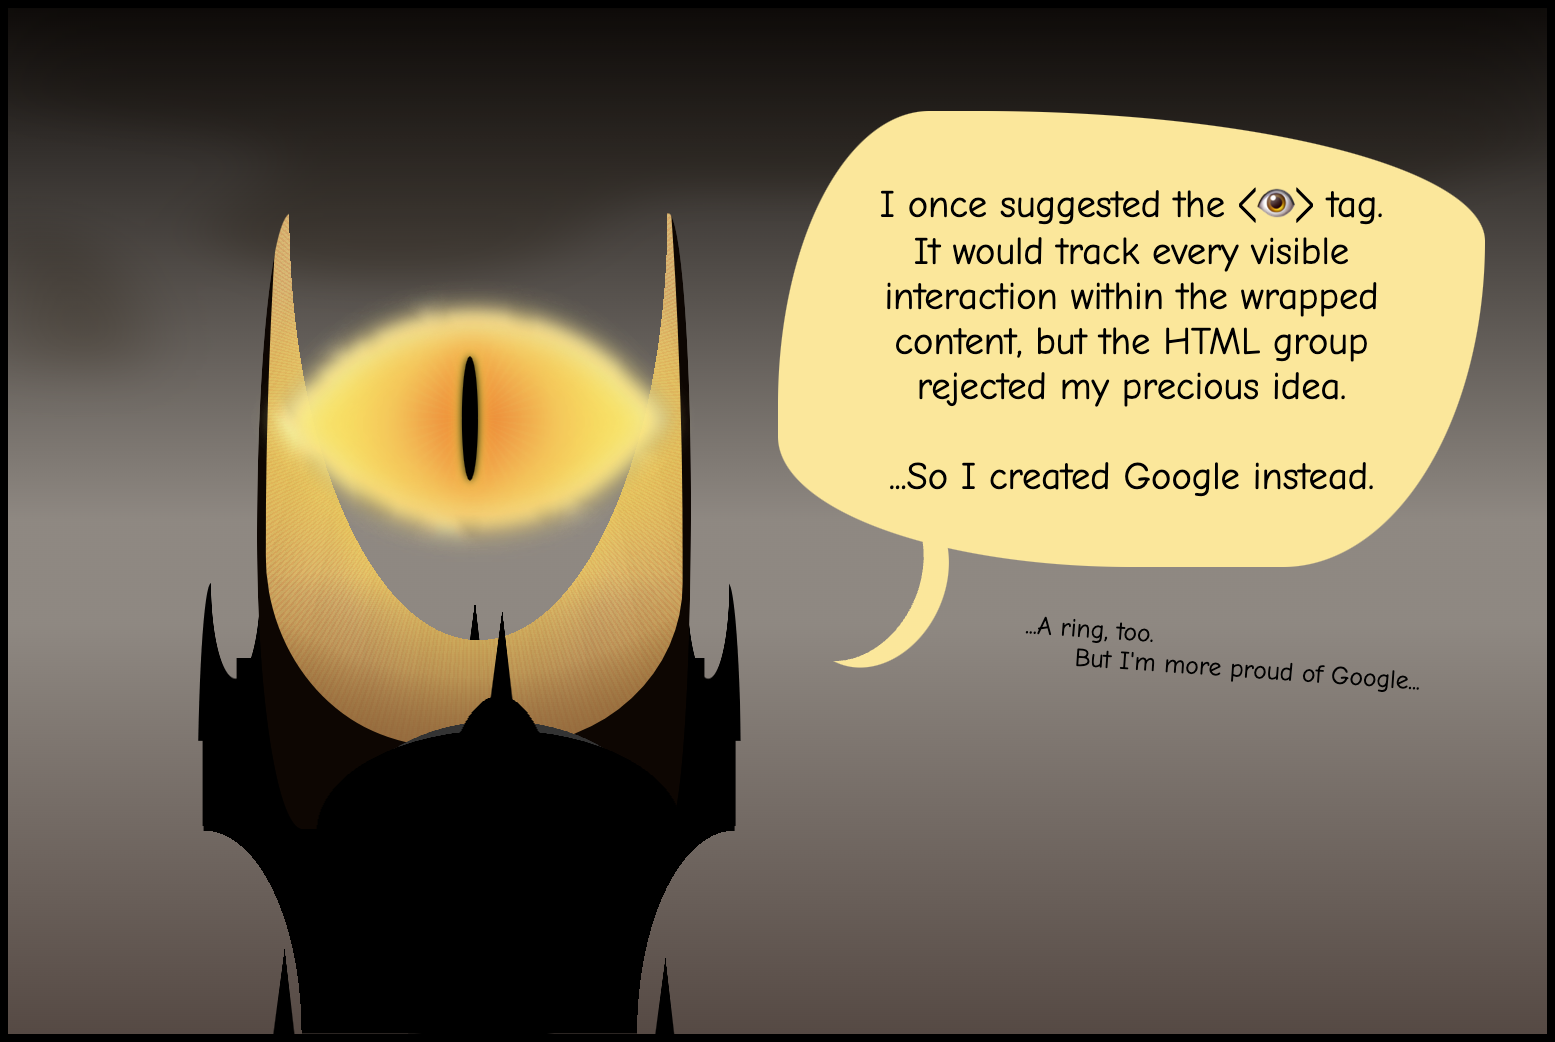 The tower of Mordor with the eye of Sauron speakign: 'I once suggested the eye tag. It would track every visible interaction within the wrapped content, but the HTML group rejected my precious idea... So I created Google instead.'